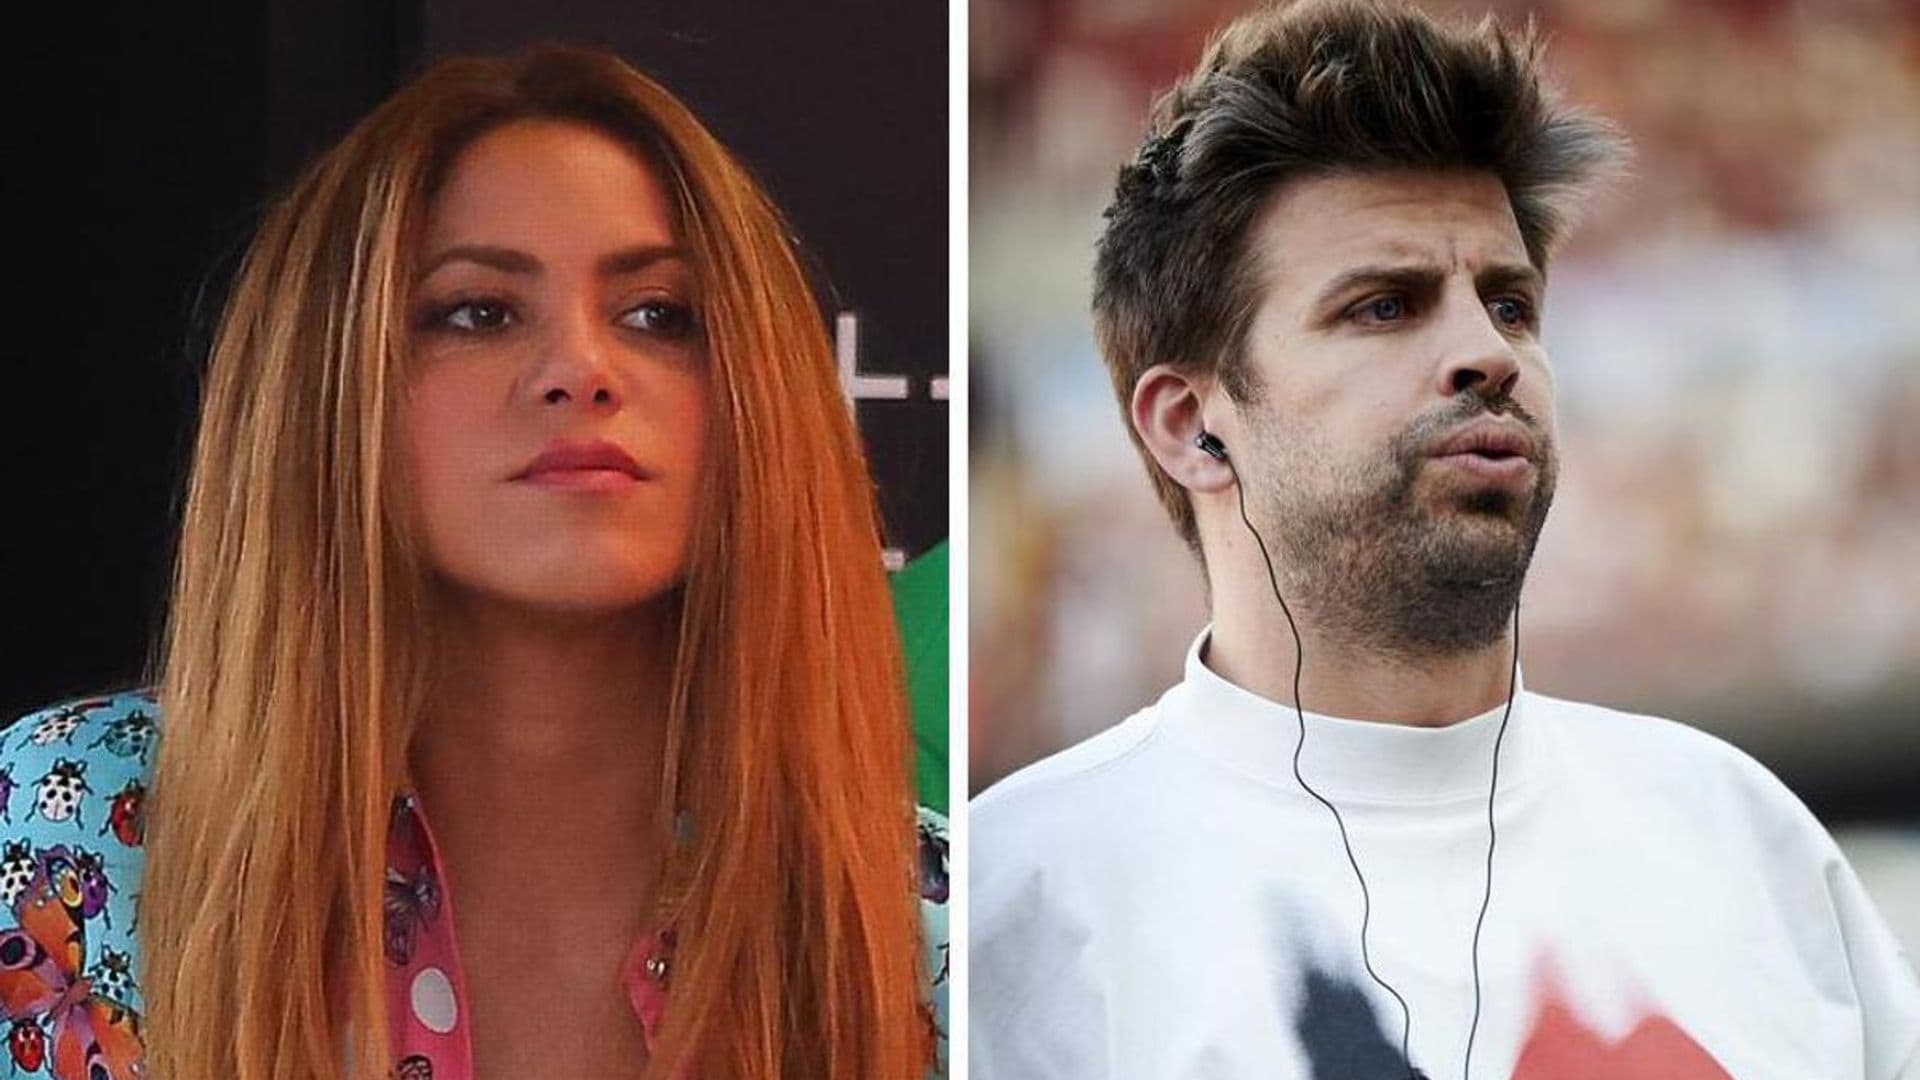 Gerard Piqué allegedly cheated on Shakira with her friend and trainer